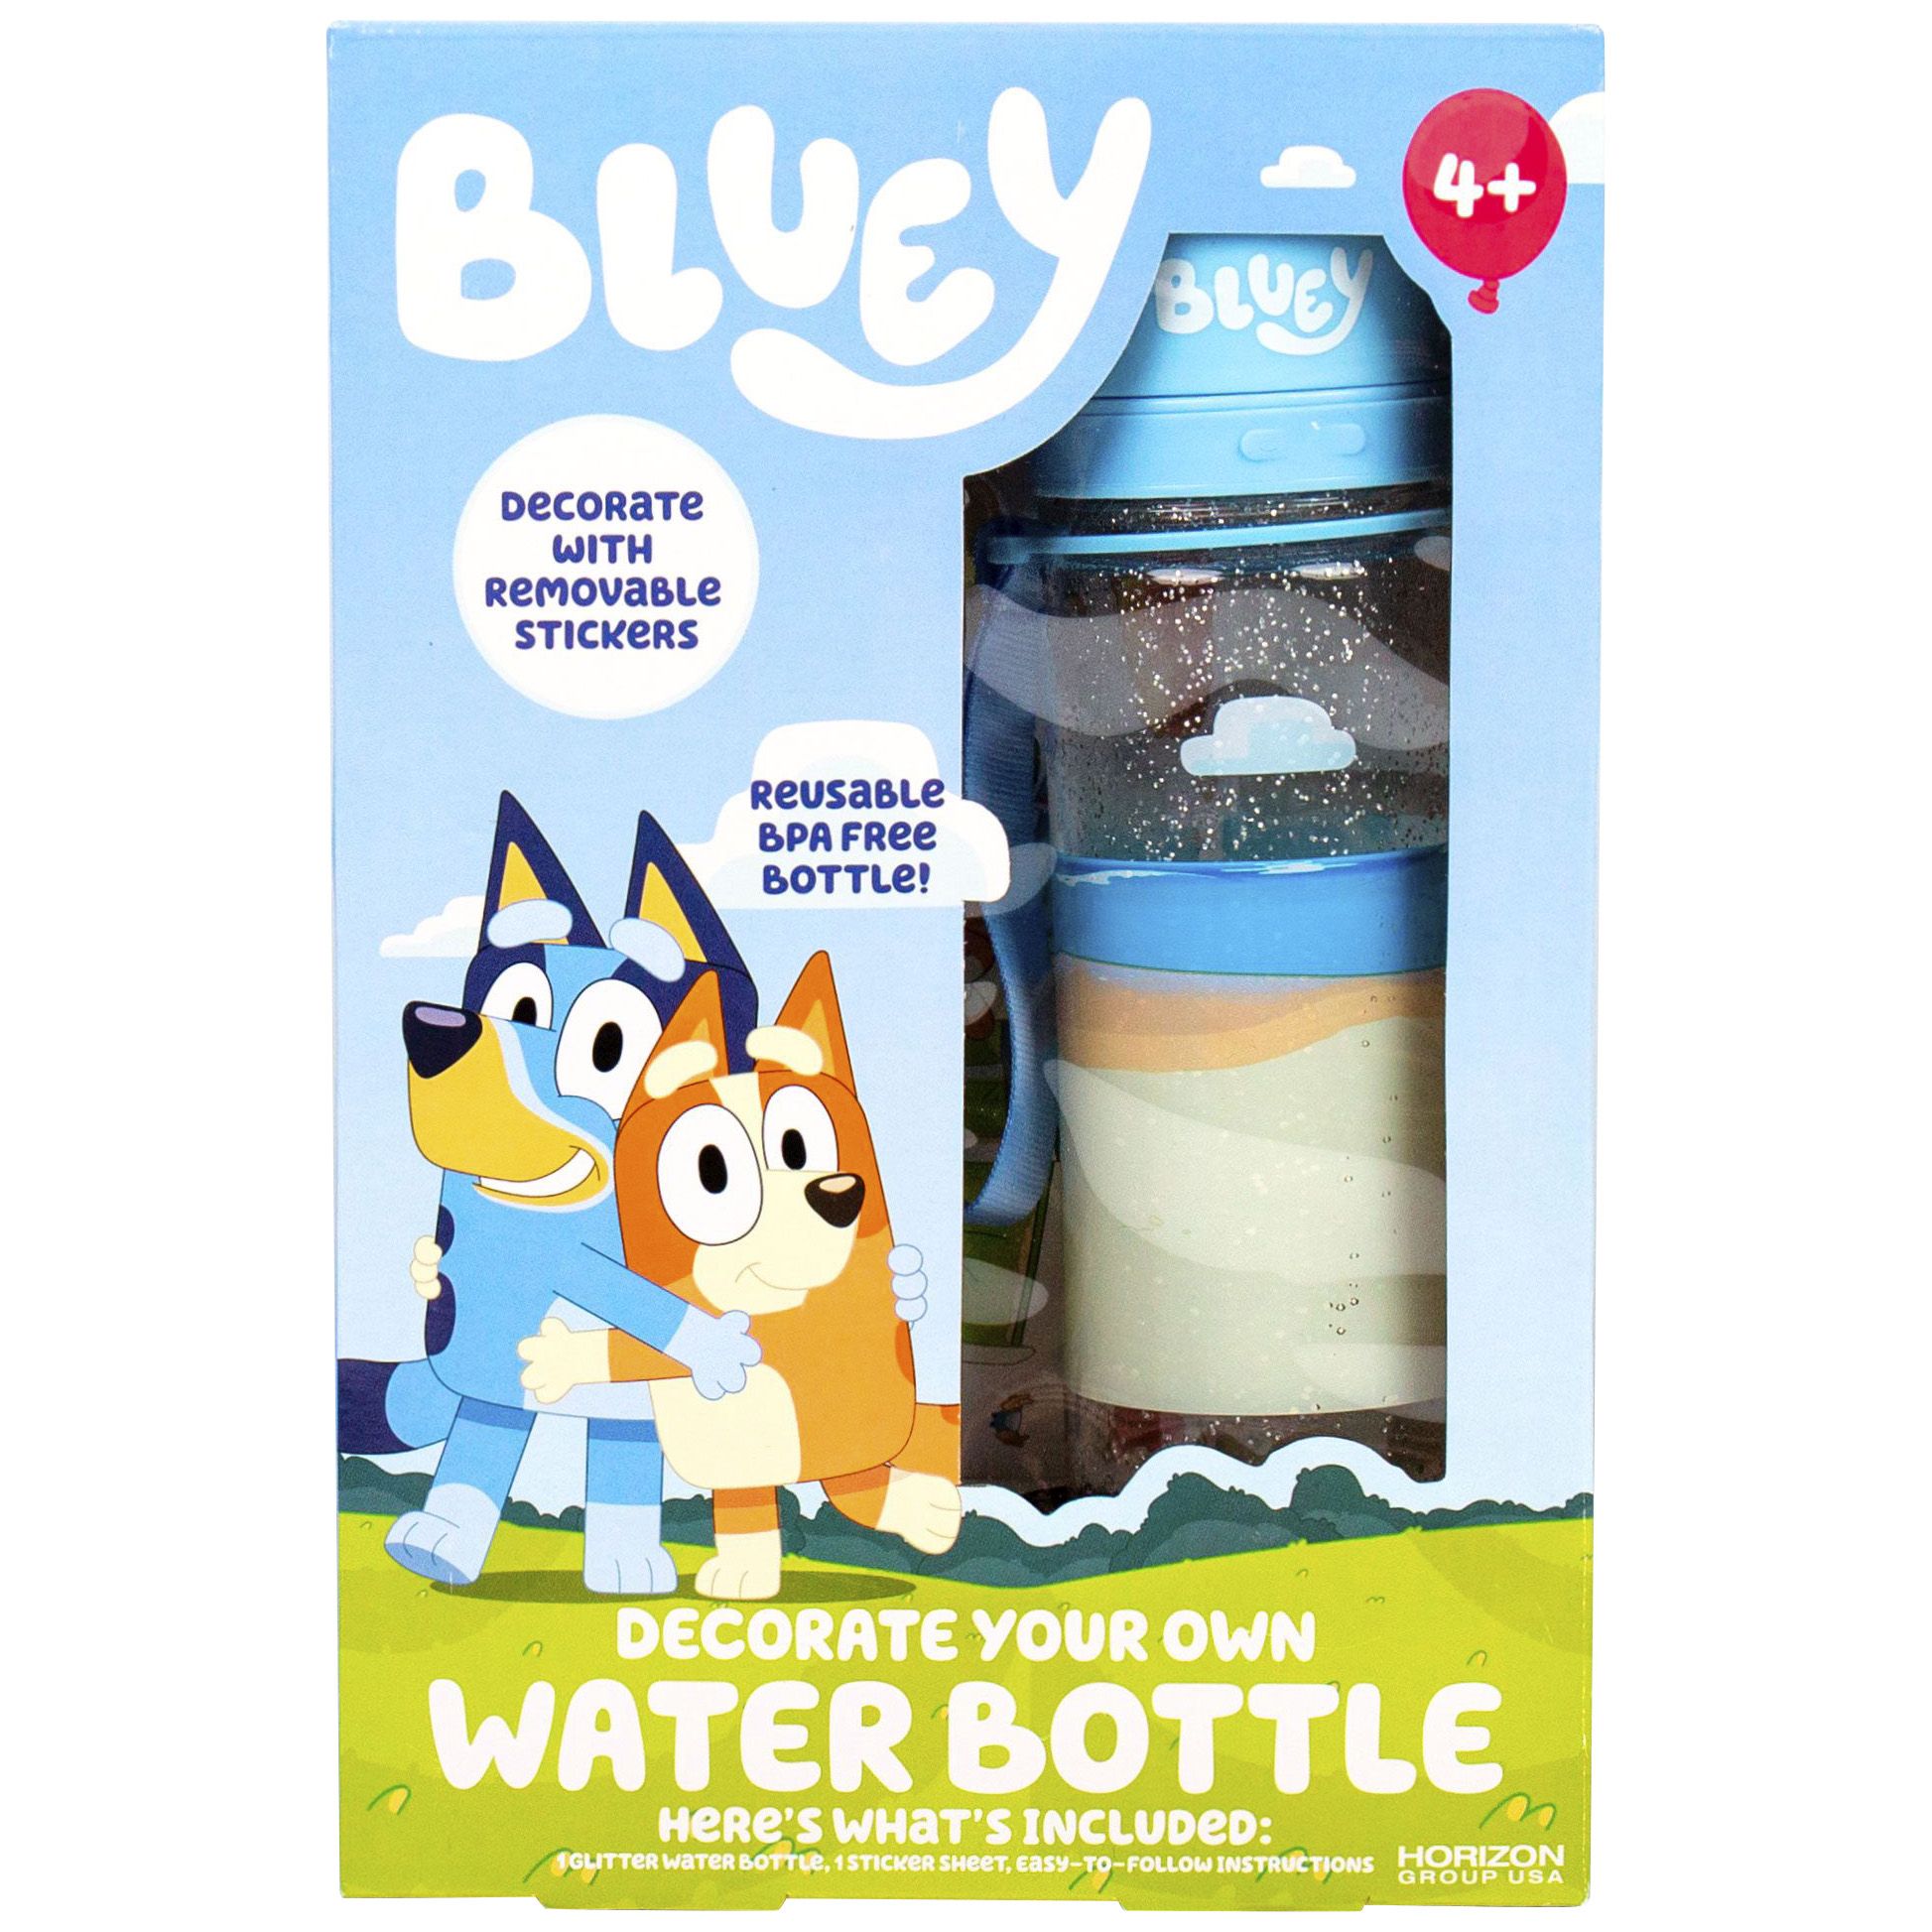 Bluey and Bingo Stainless Steel Water Bottle, Sports Lid 